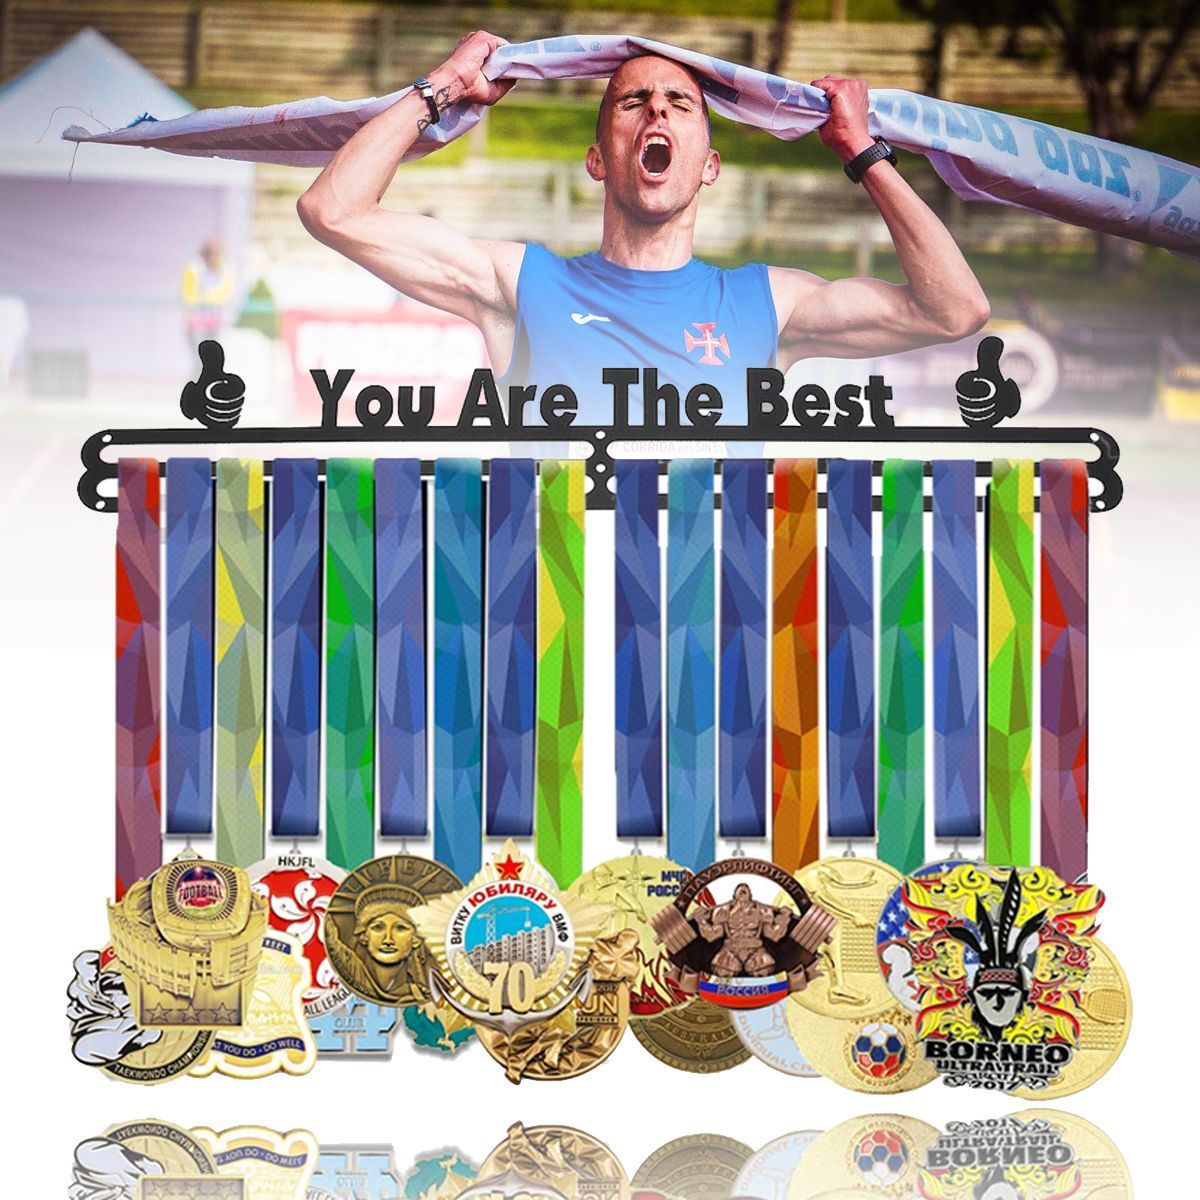 You-Are-The-Best-Medal-Hanger-Running-Sport-Metal-Display-Rack-Iron-Holder-Home-Decorations-1570248